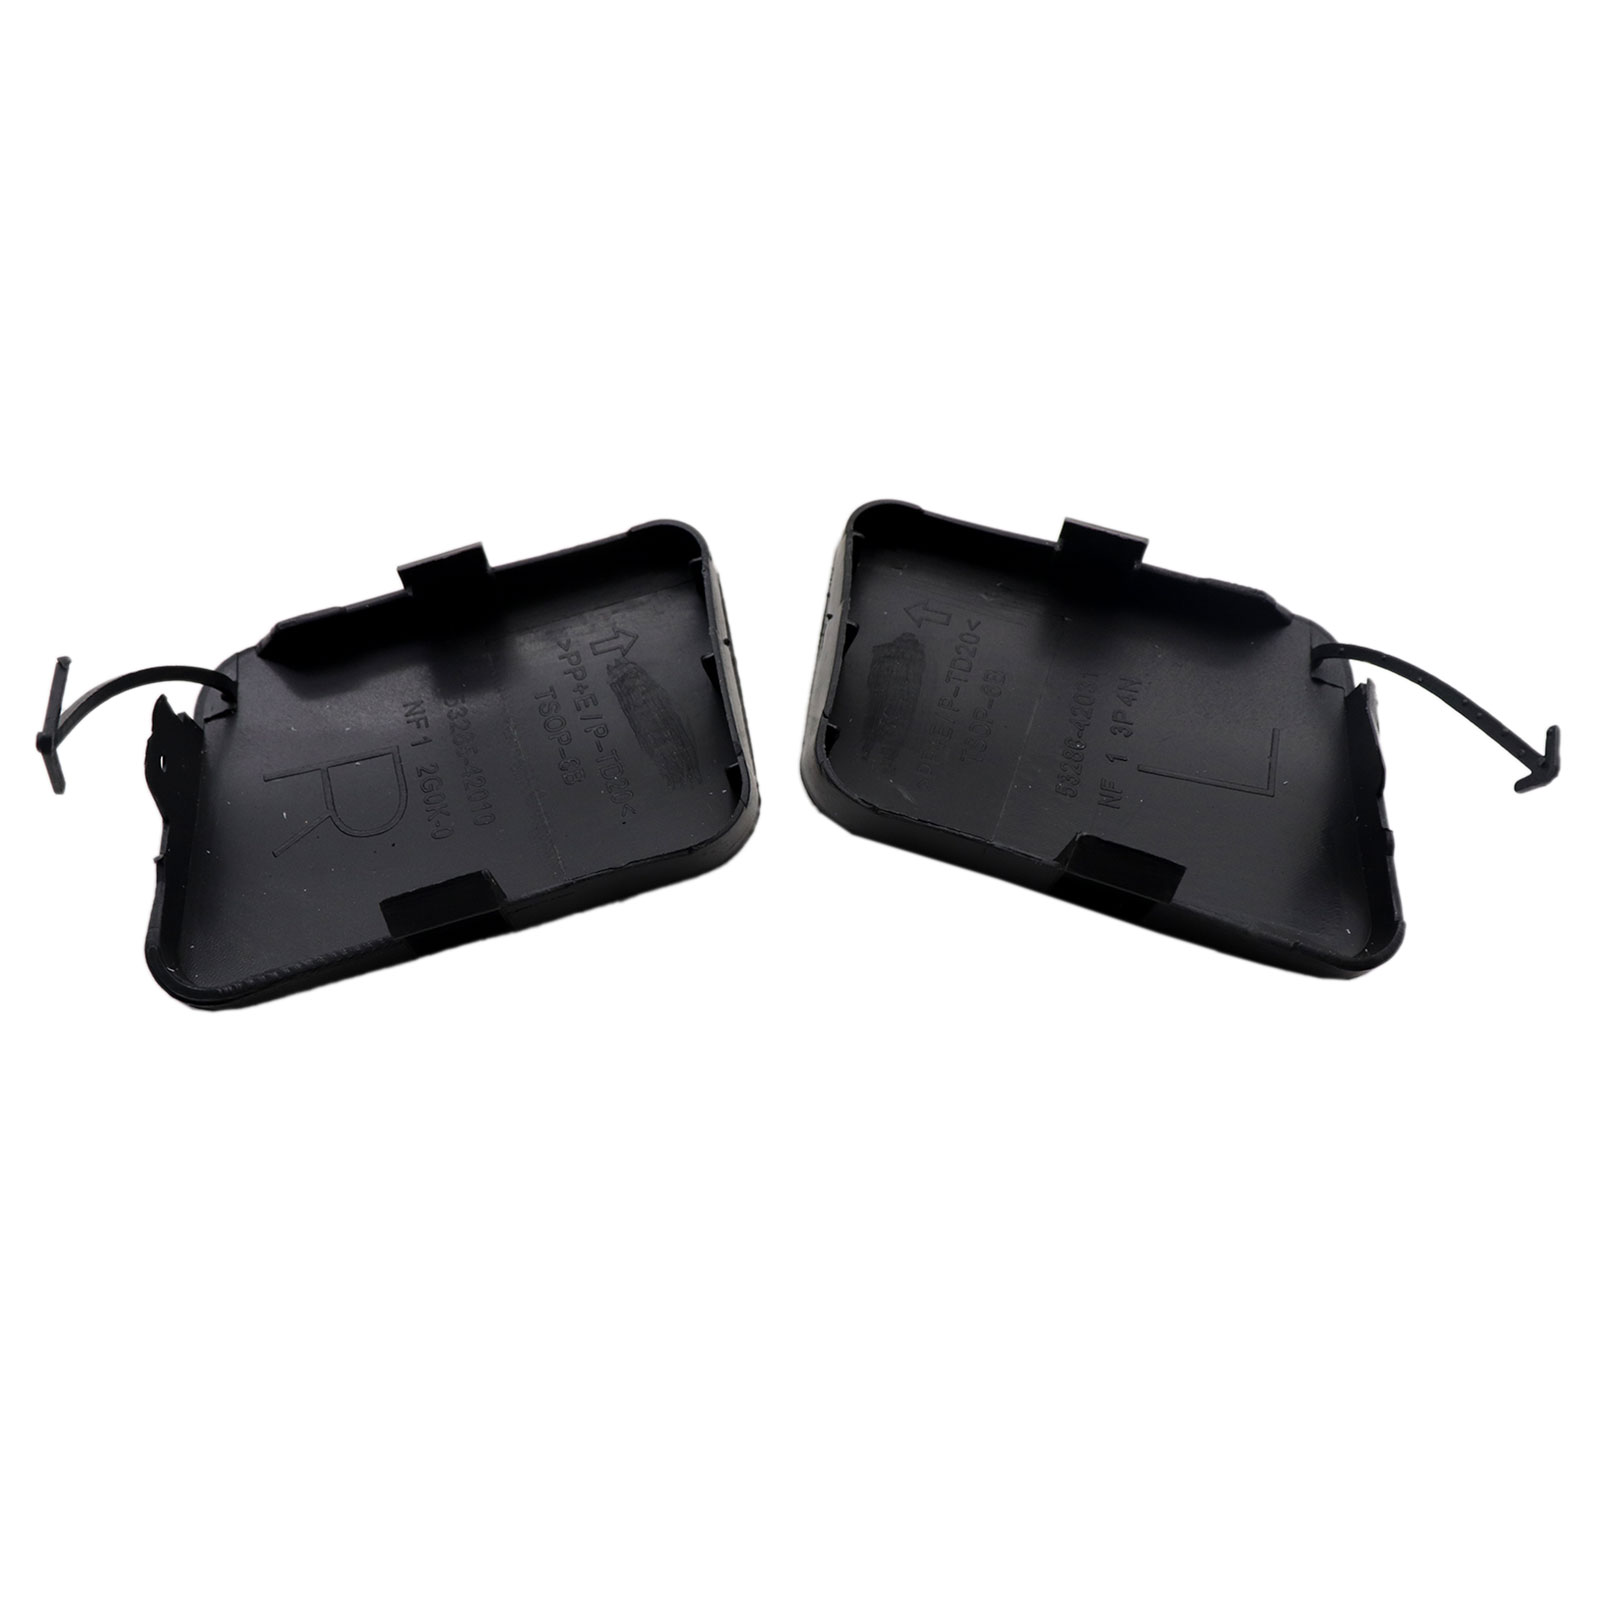 2 x Front Left Right Bumper Tow Hook Cover Cap for Toyota RAV4 2006-2008 | eBay 2008 Toyota Rav4 Front Bumper Tow Hook Cover